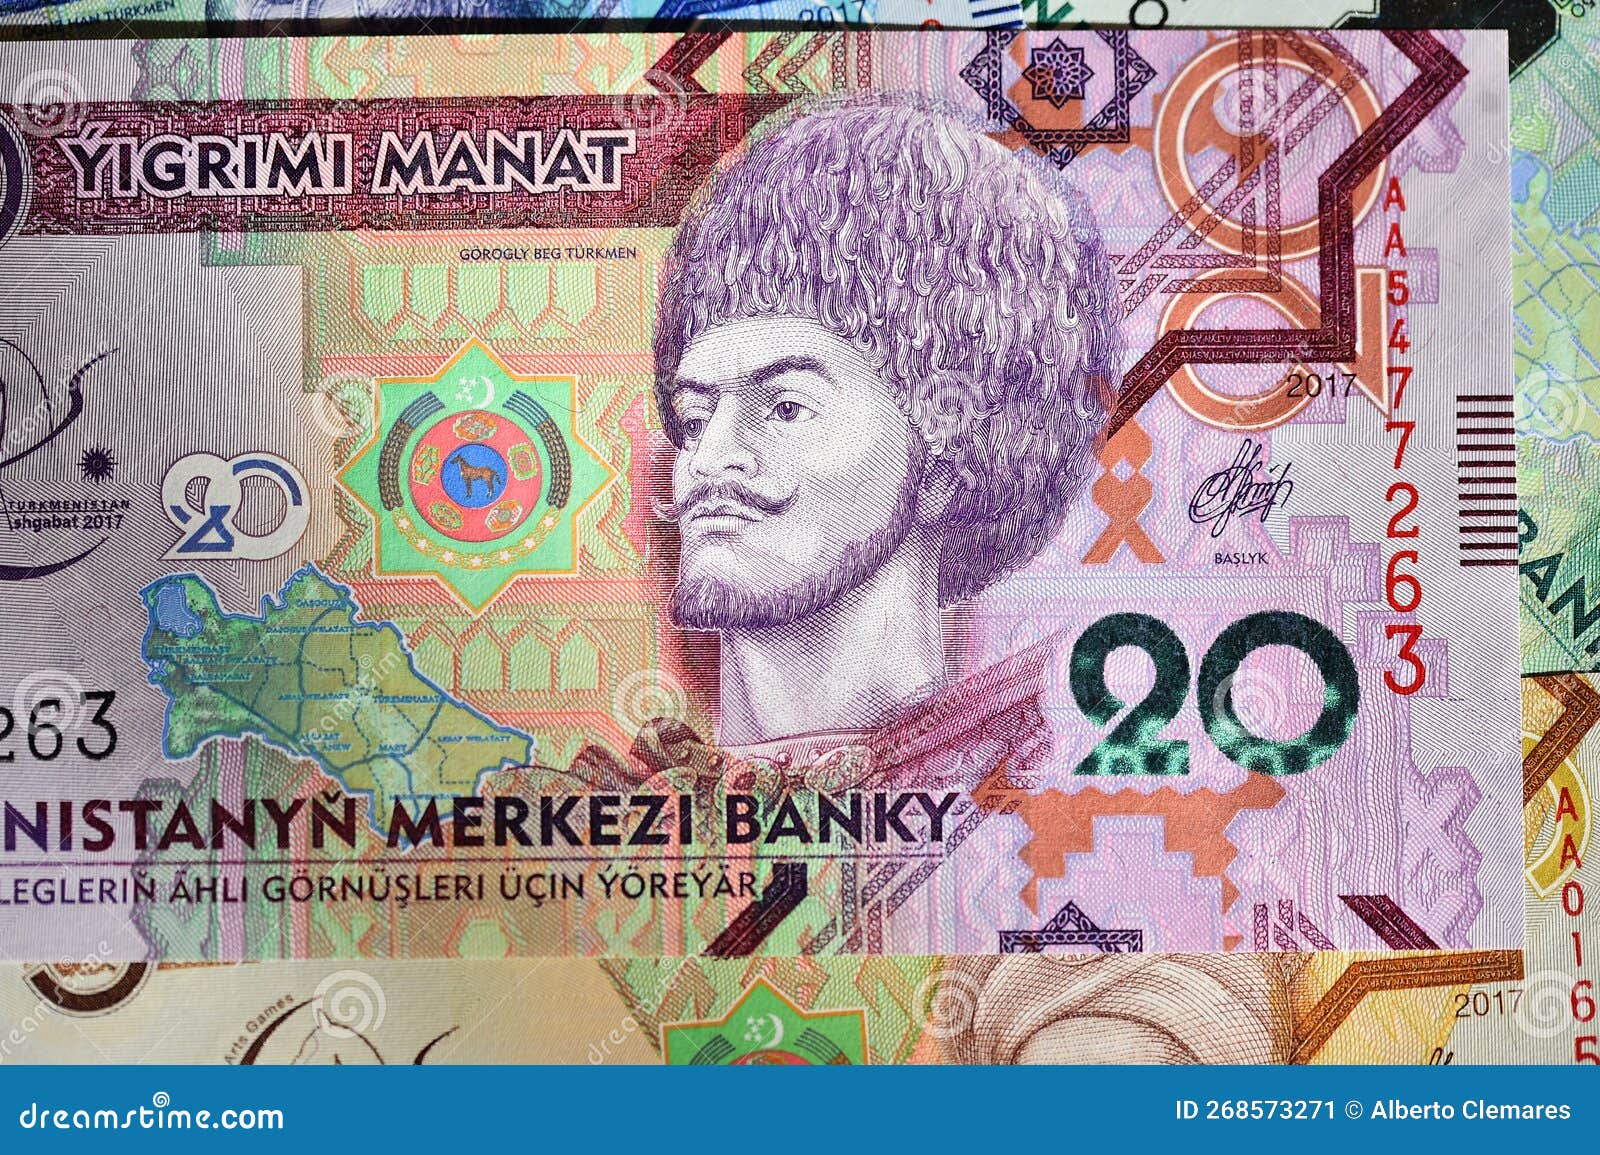 some current banknotes of turkmenistan